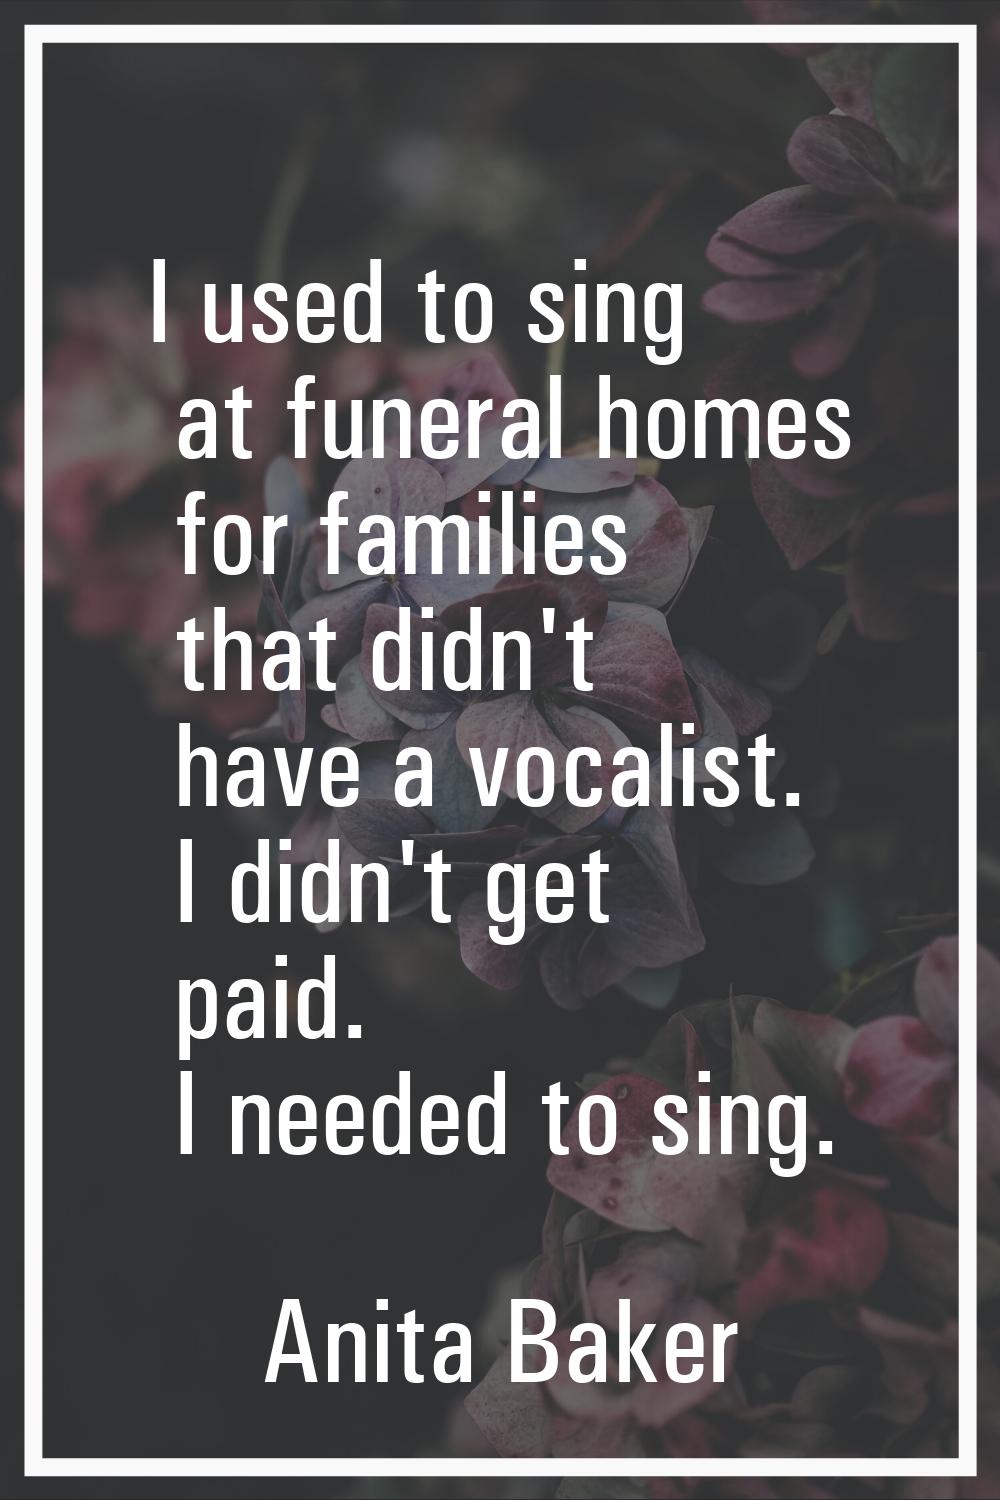 I used to sing at funeral homes for families that didn't have a vocalist. I didn't get paid. I need